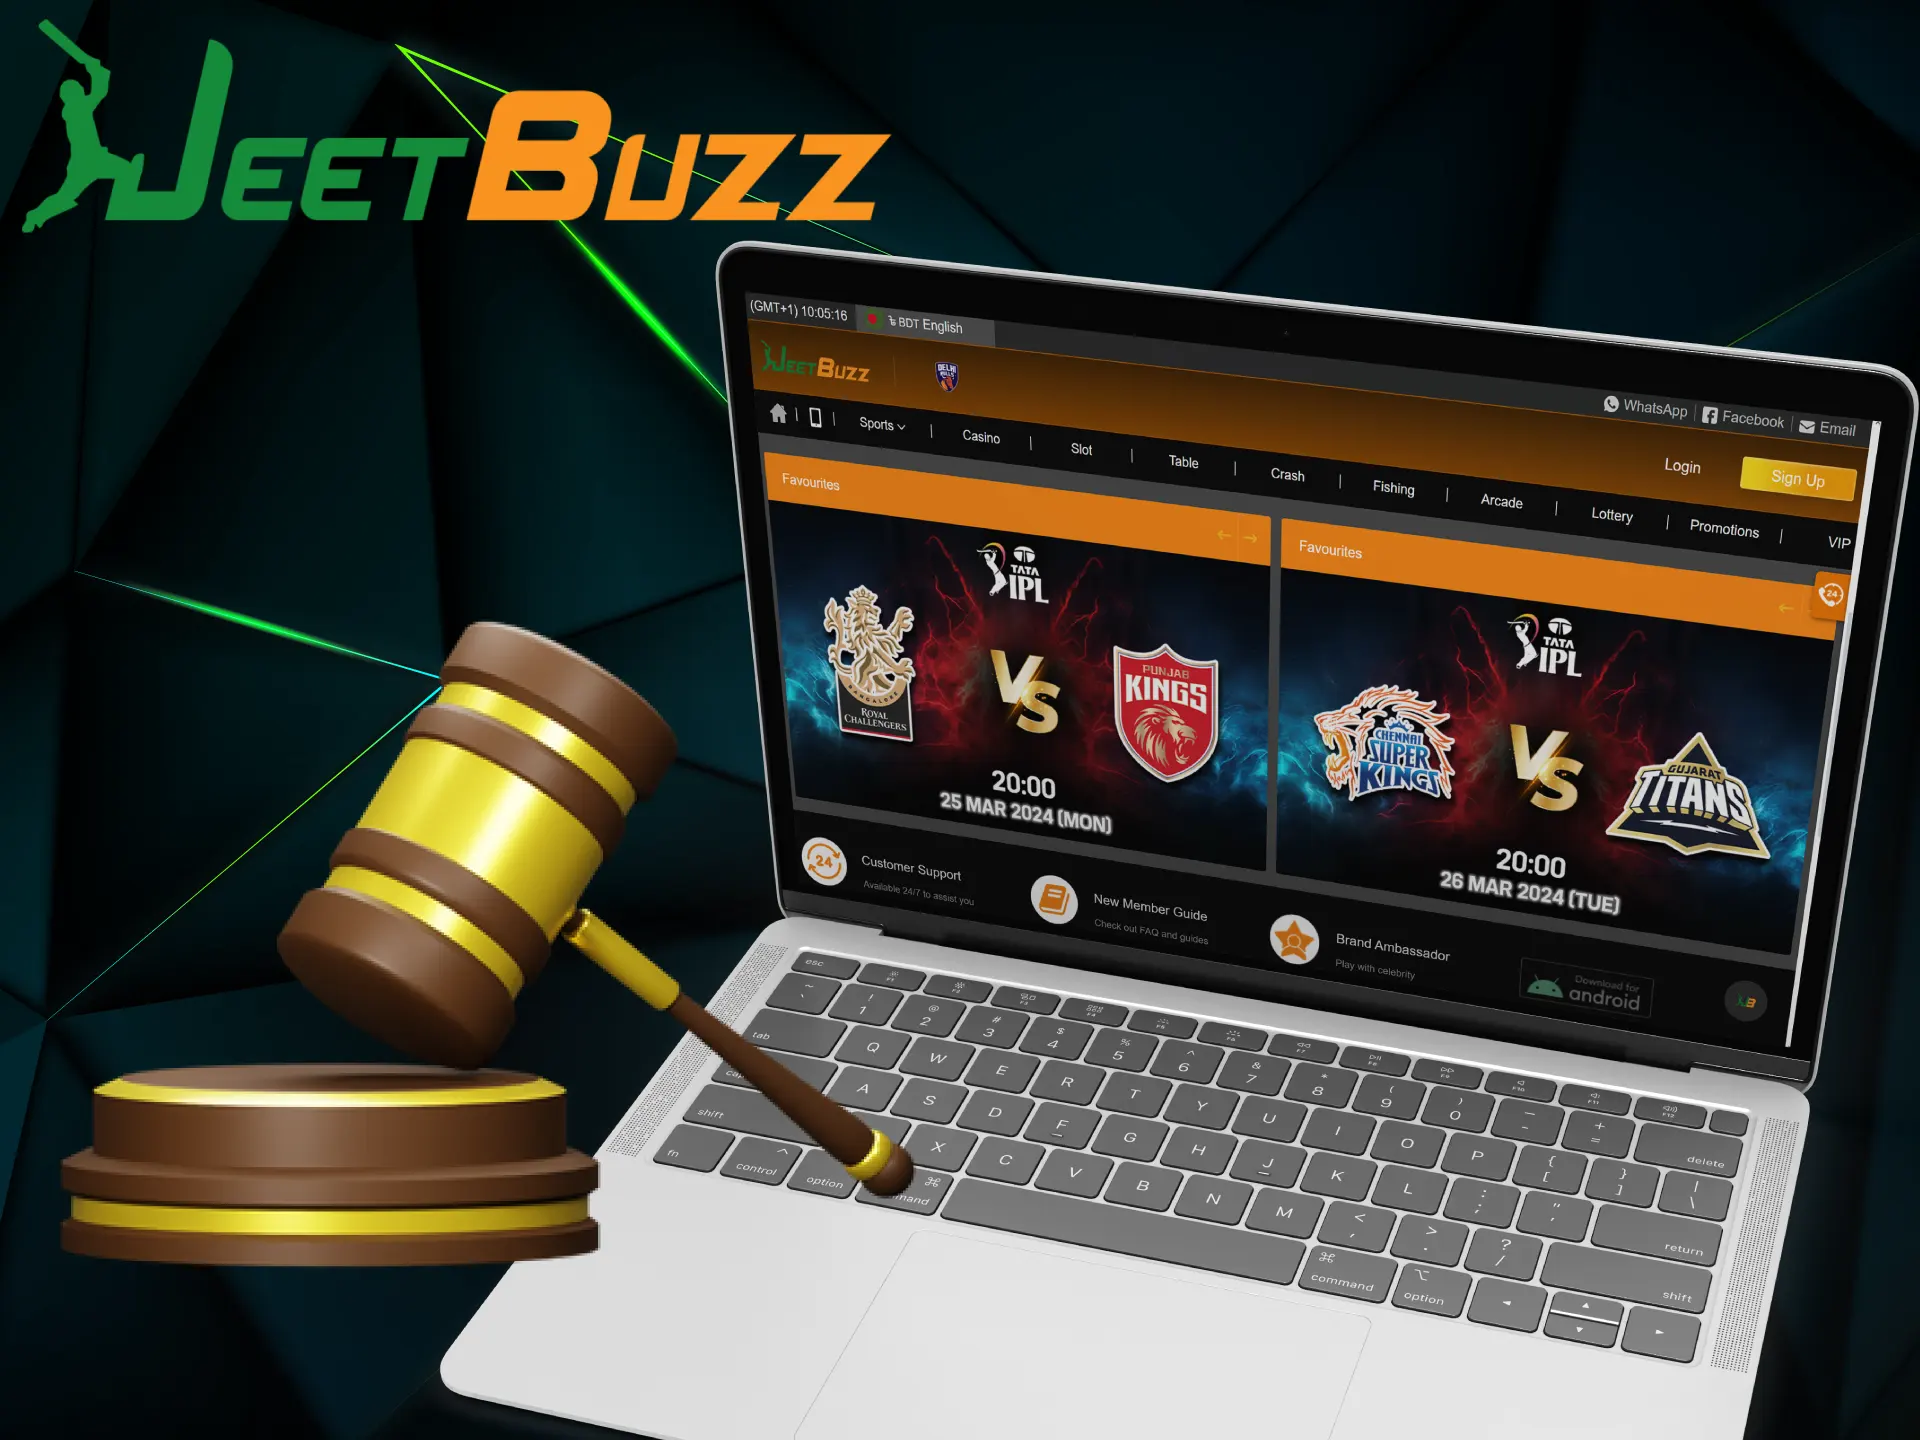 You can bet on cricket at JeetBuzz in Bangladesh legally.